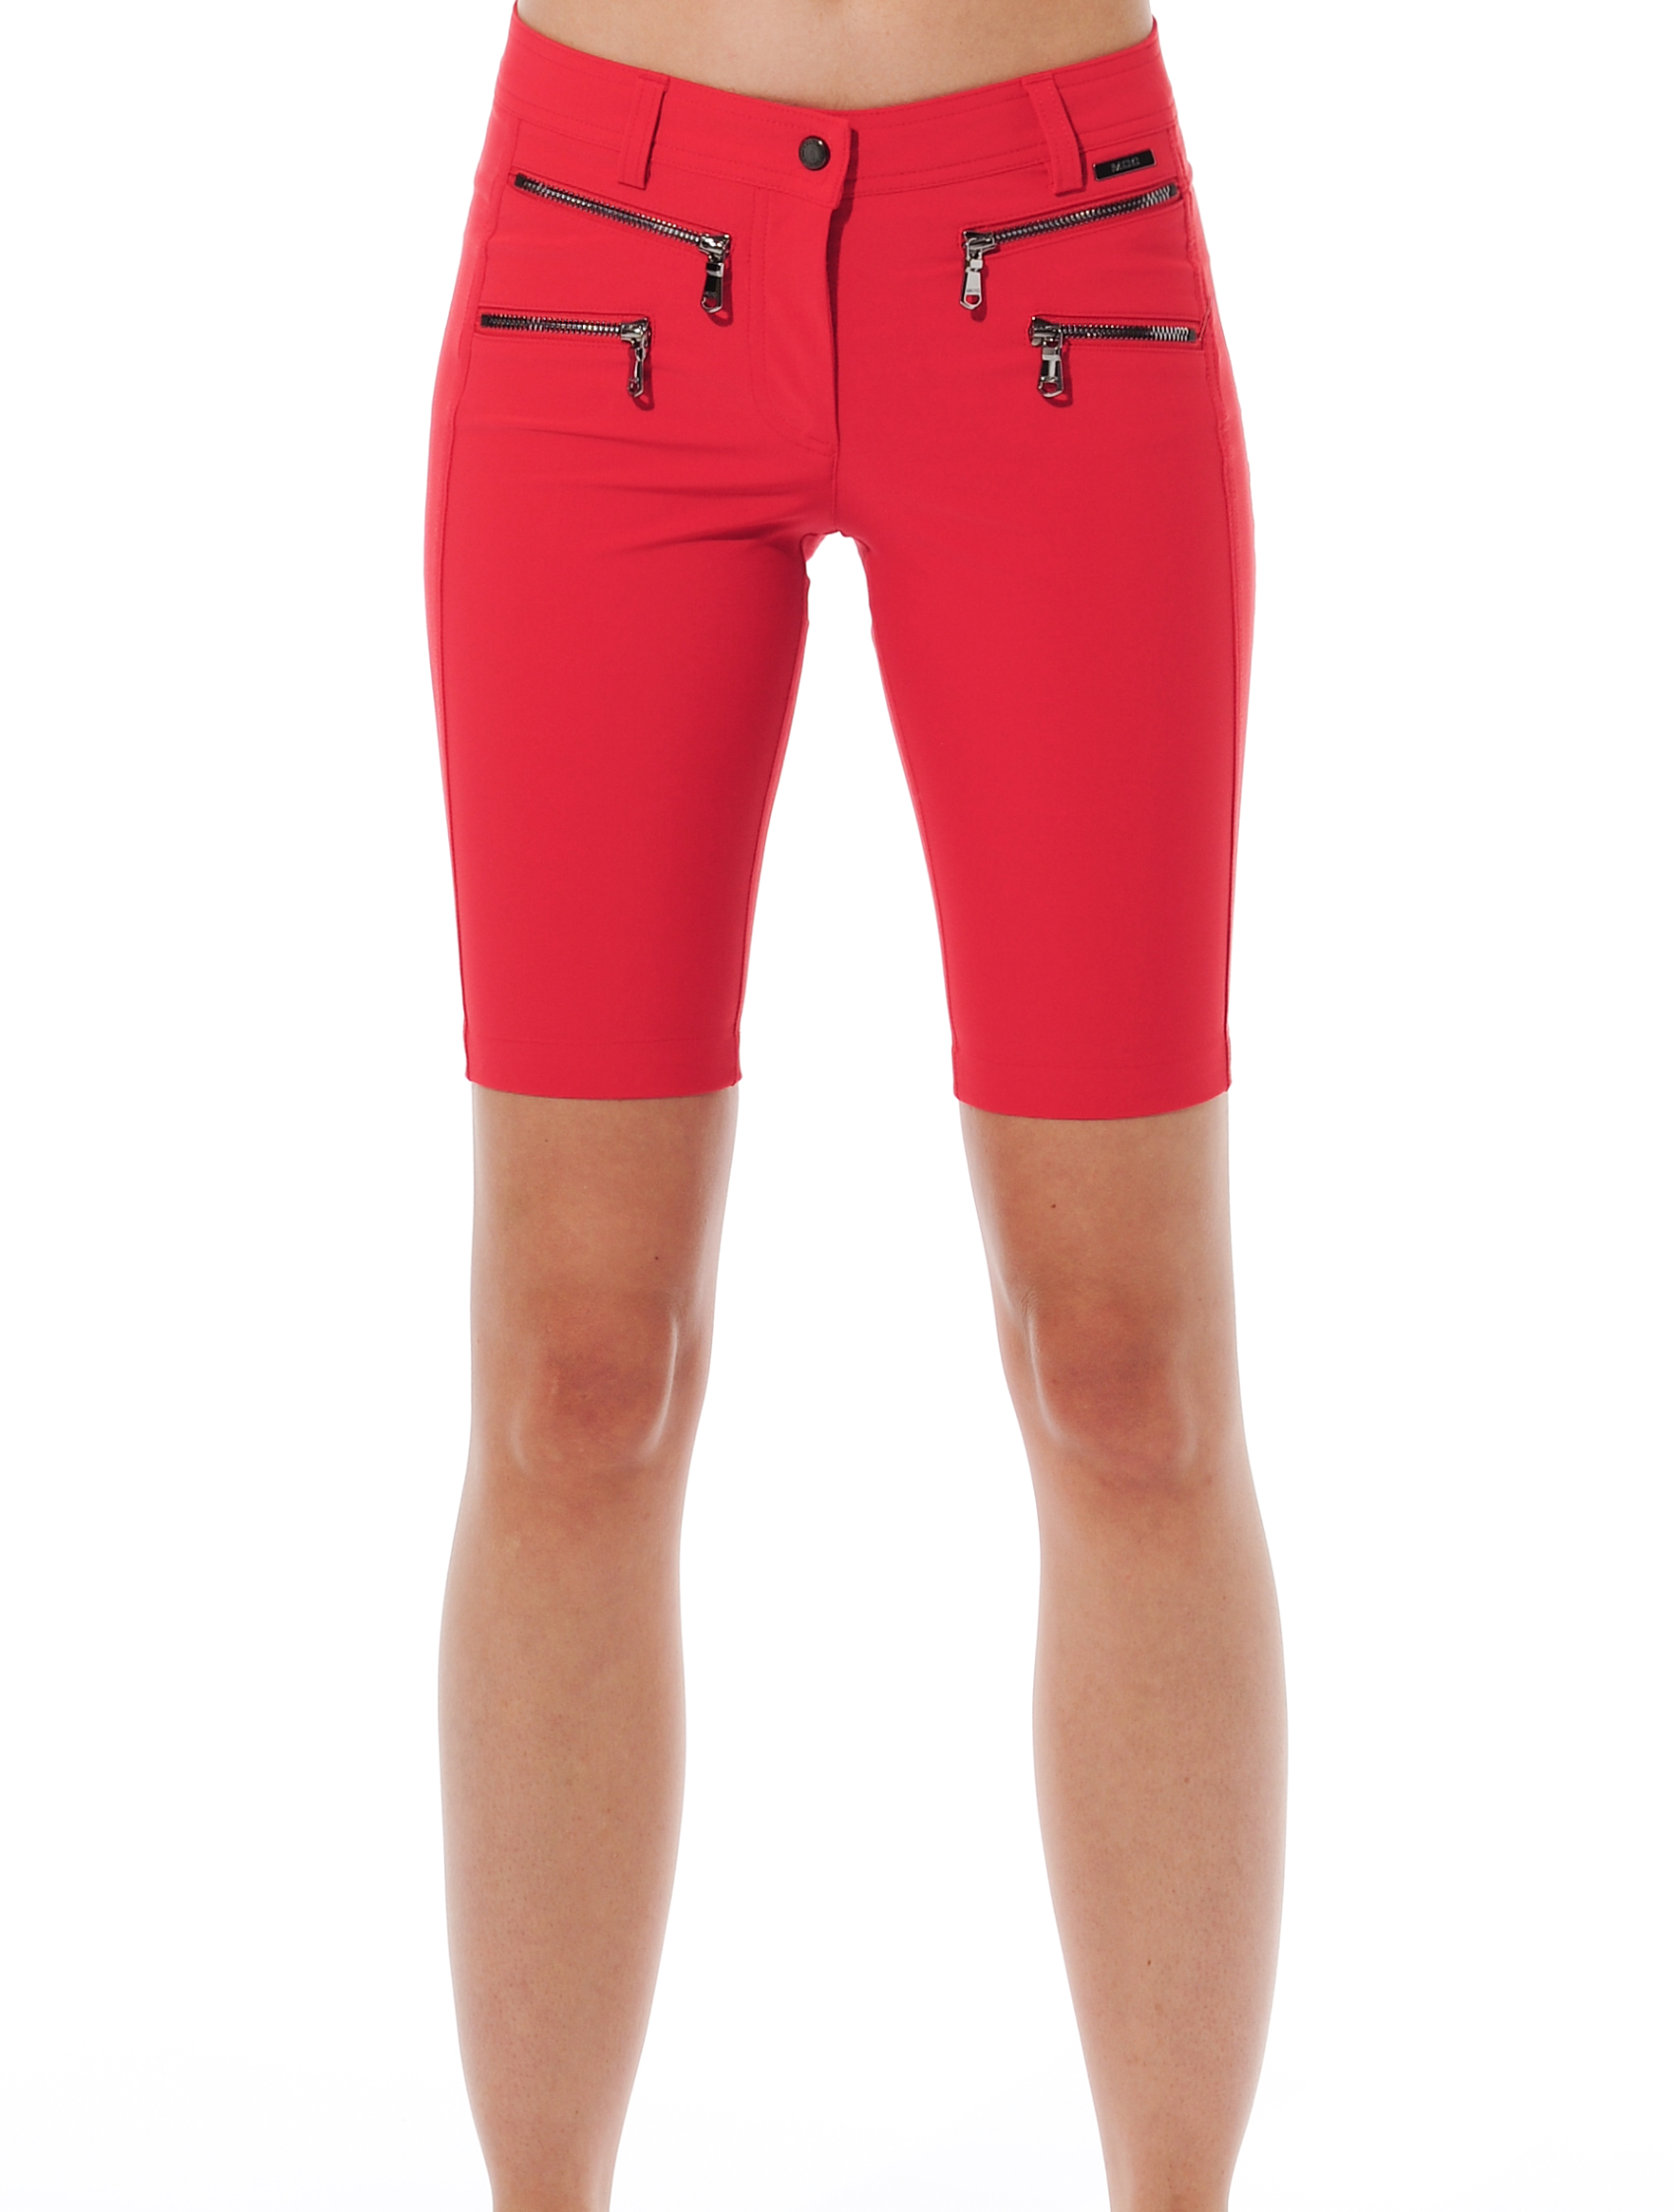 4way stretch double zip shorts red 